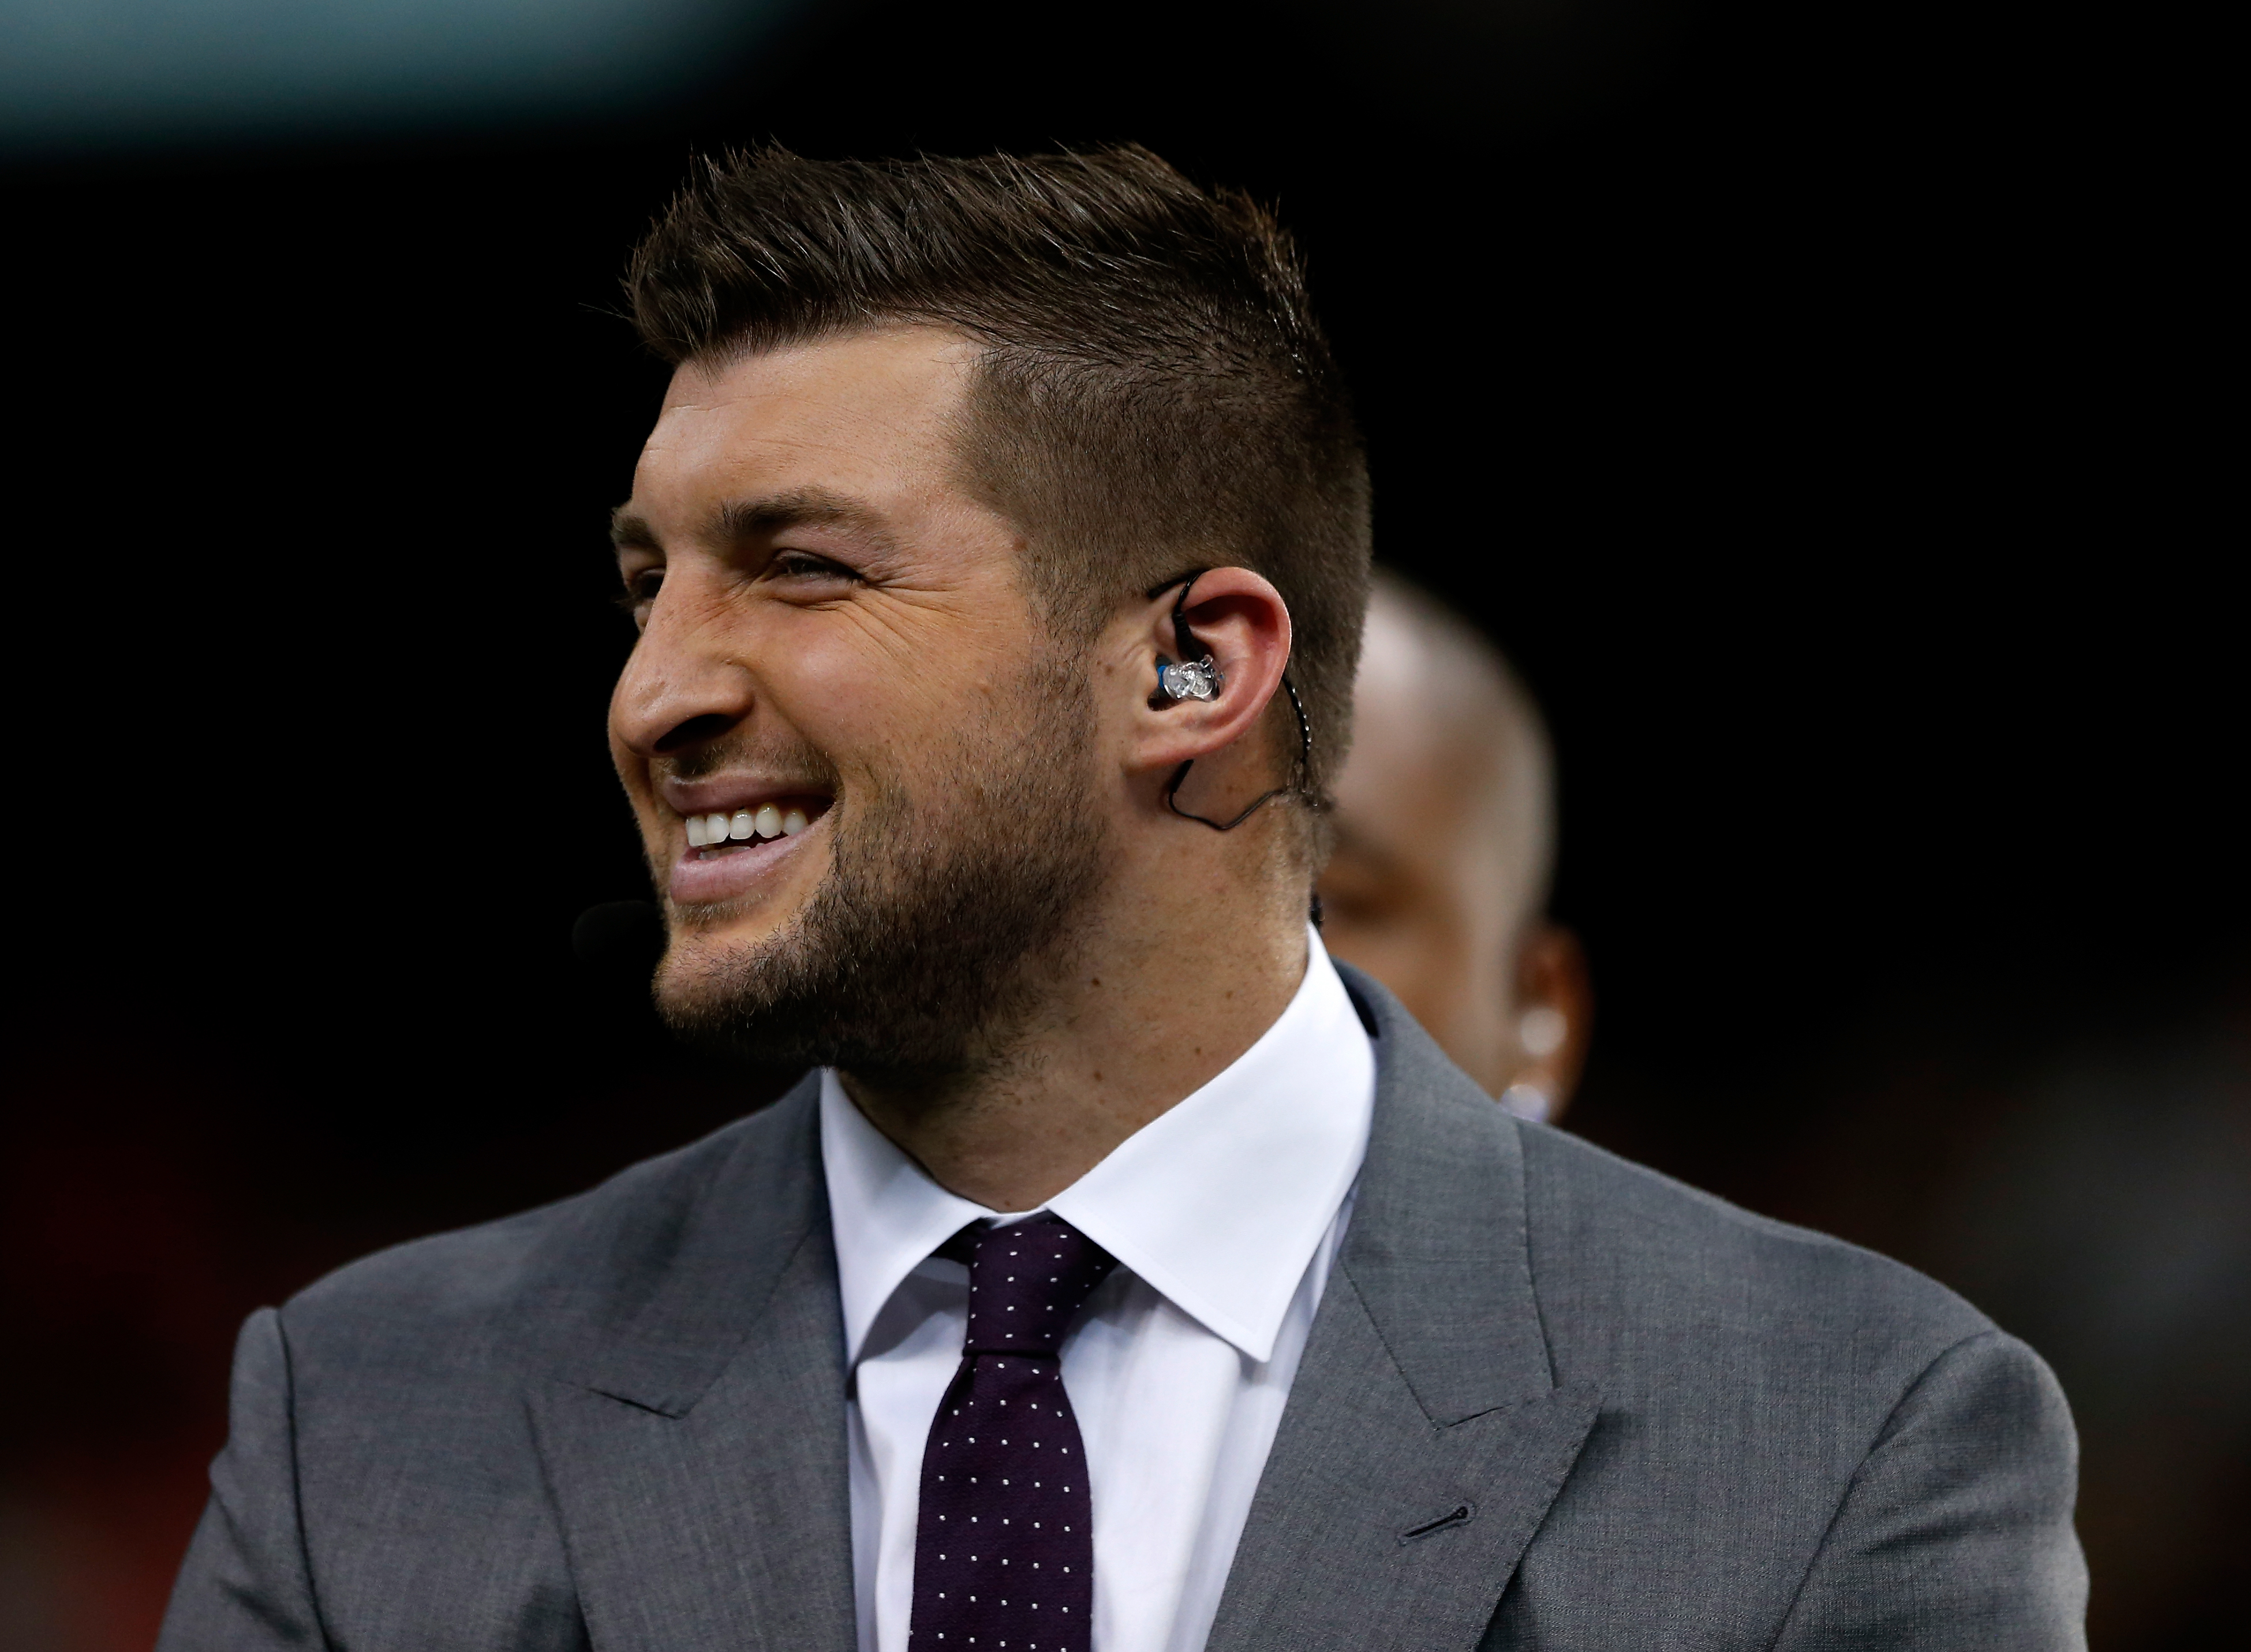 Tim Tebow walks onto the field during the All State Sugar Bowl at the Mercedes-Benz Superdome on January 1, 2015 in New Orleans, Louisiana. (Sean Gardner&amp;mdash;Getty Images)